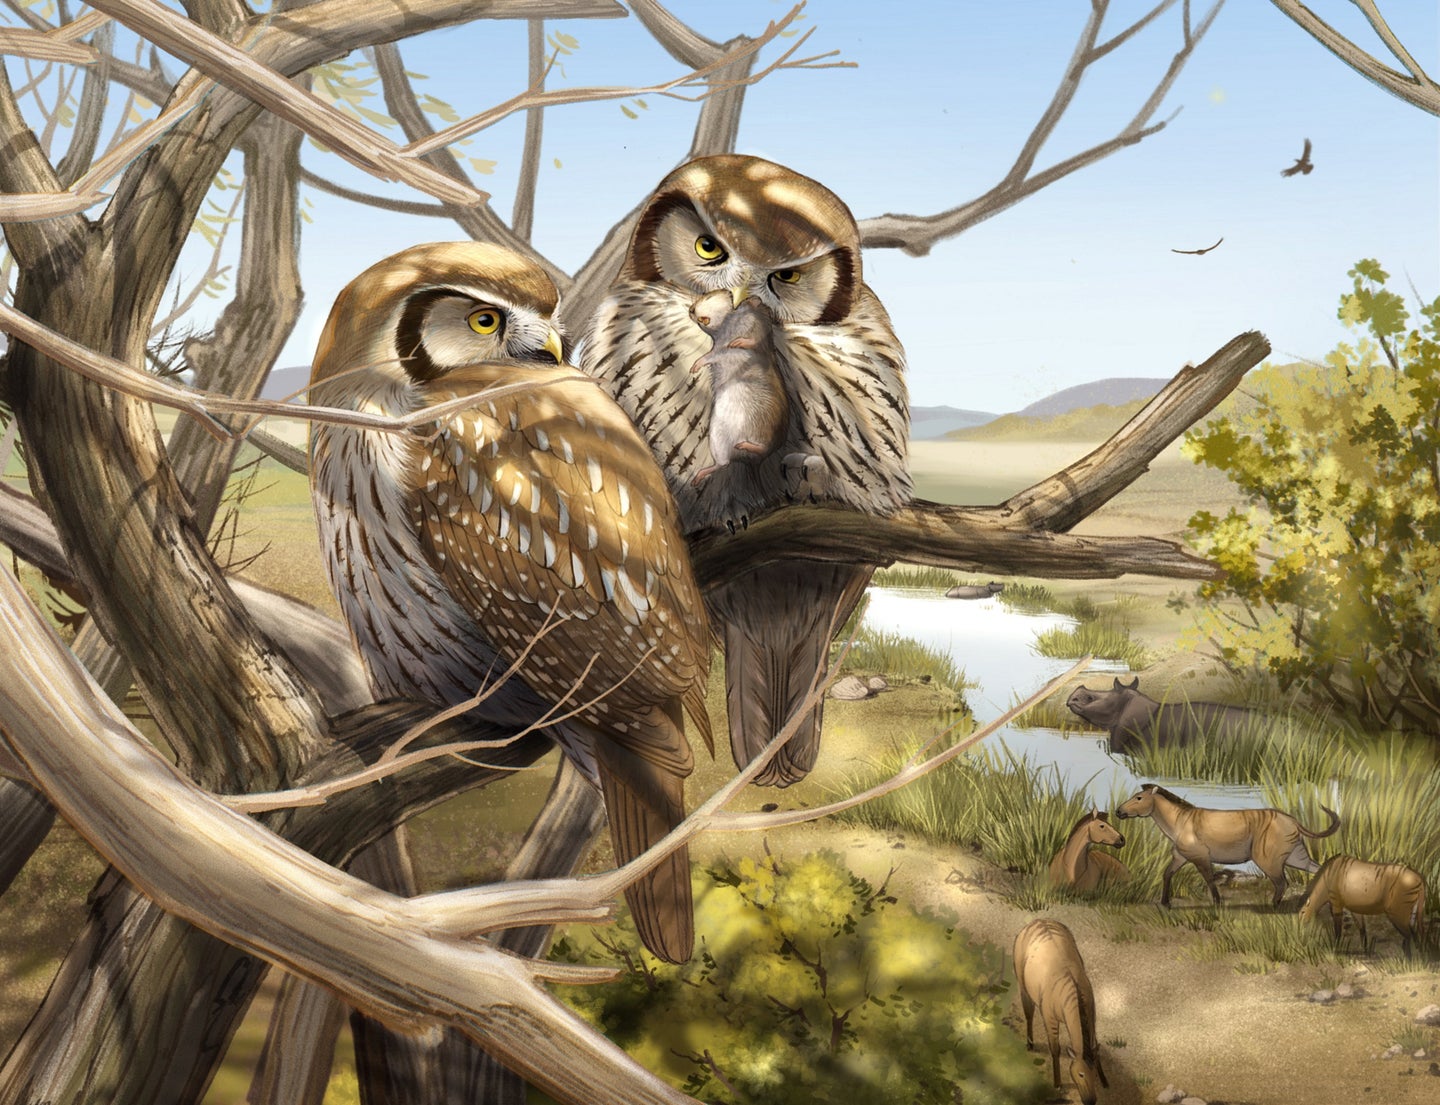 Two mid-sized brown owls sitting on a branch in daylight with horses, rhinos, and soaring birds in the background in an illustration